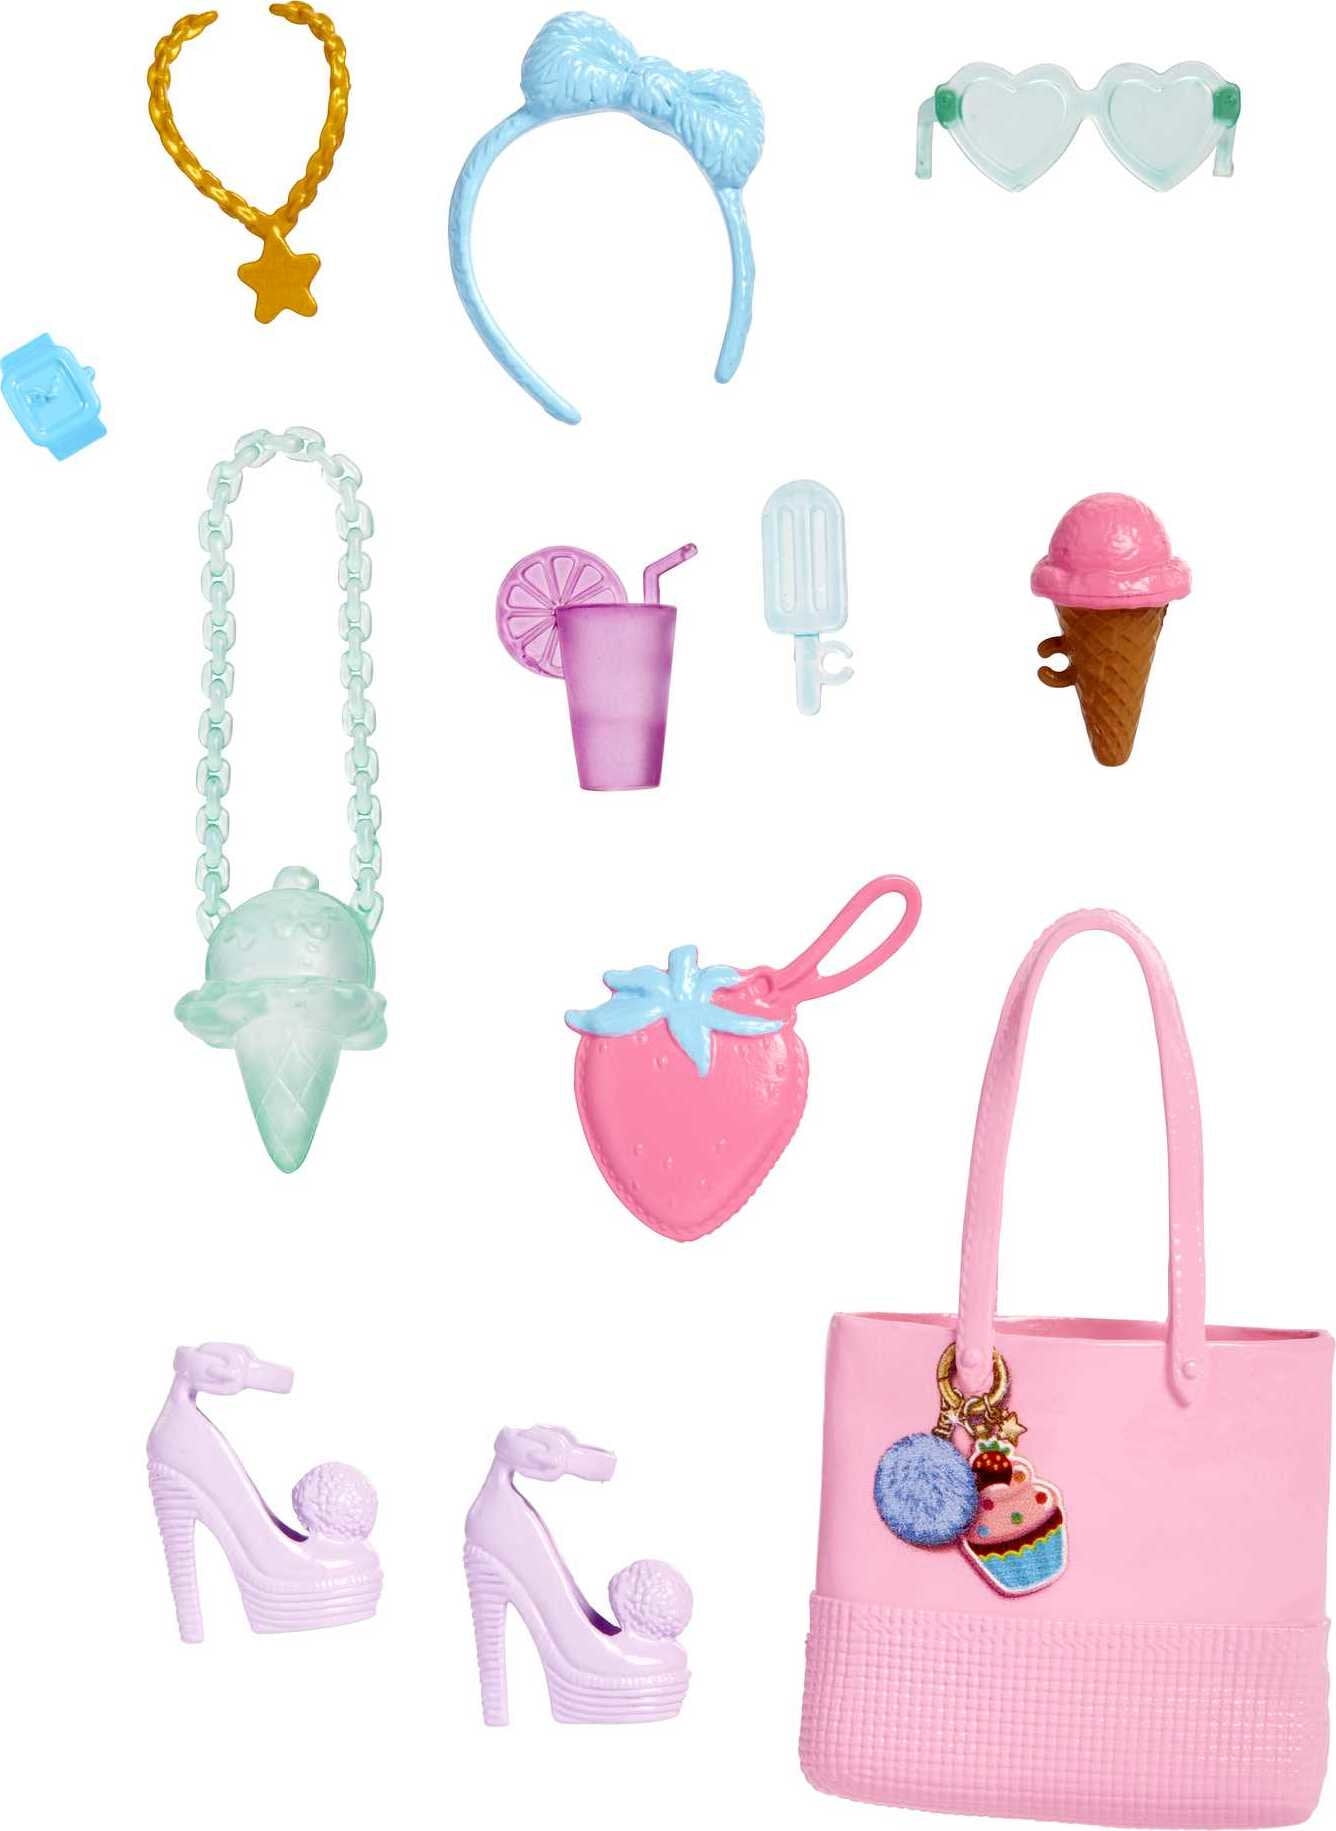 Barbie Doll Accessory Pack, 11 Dessert and Candy-Themed